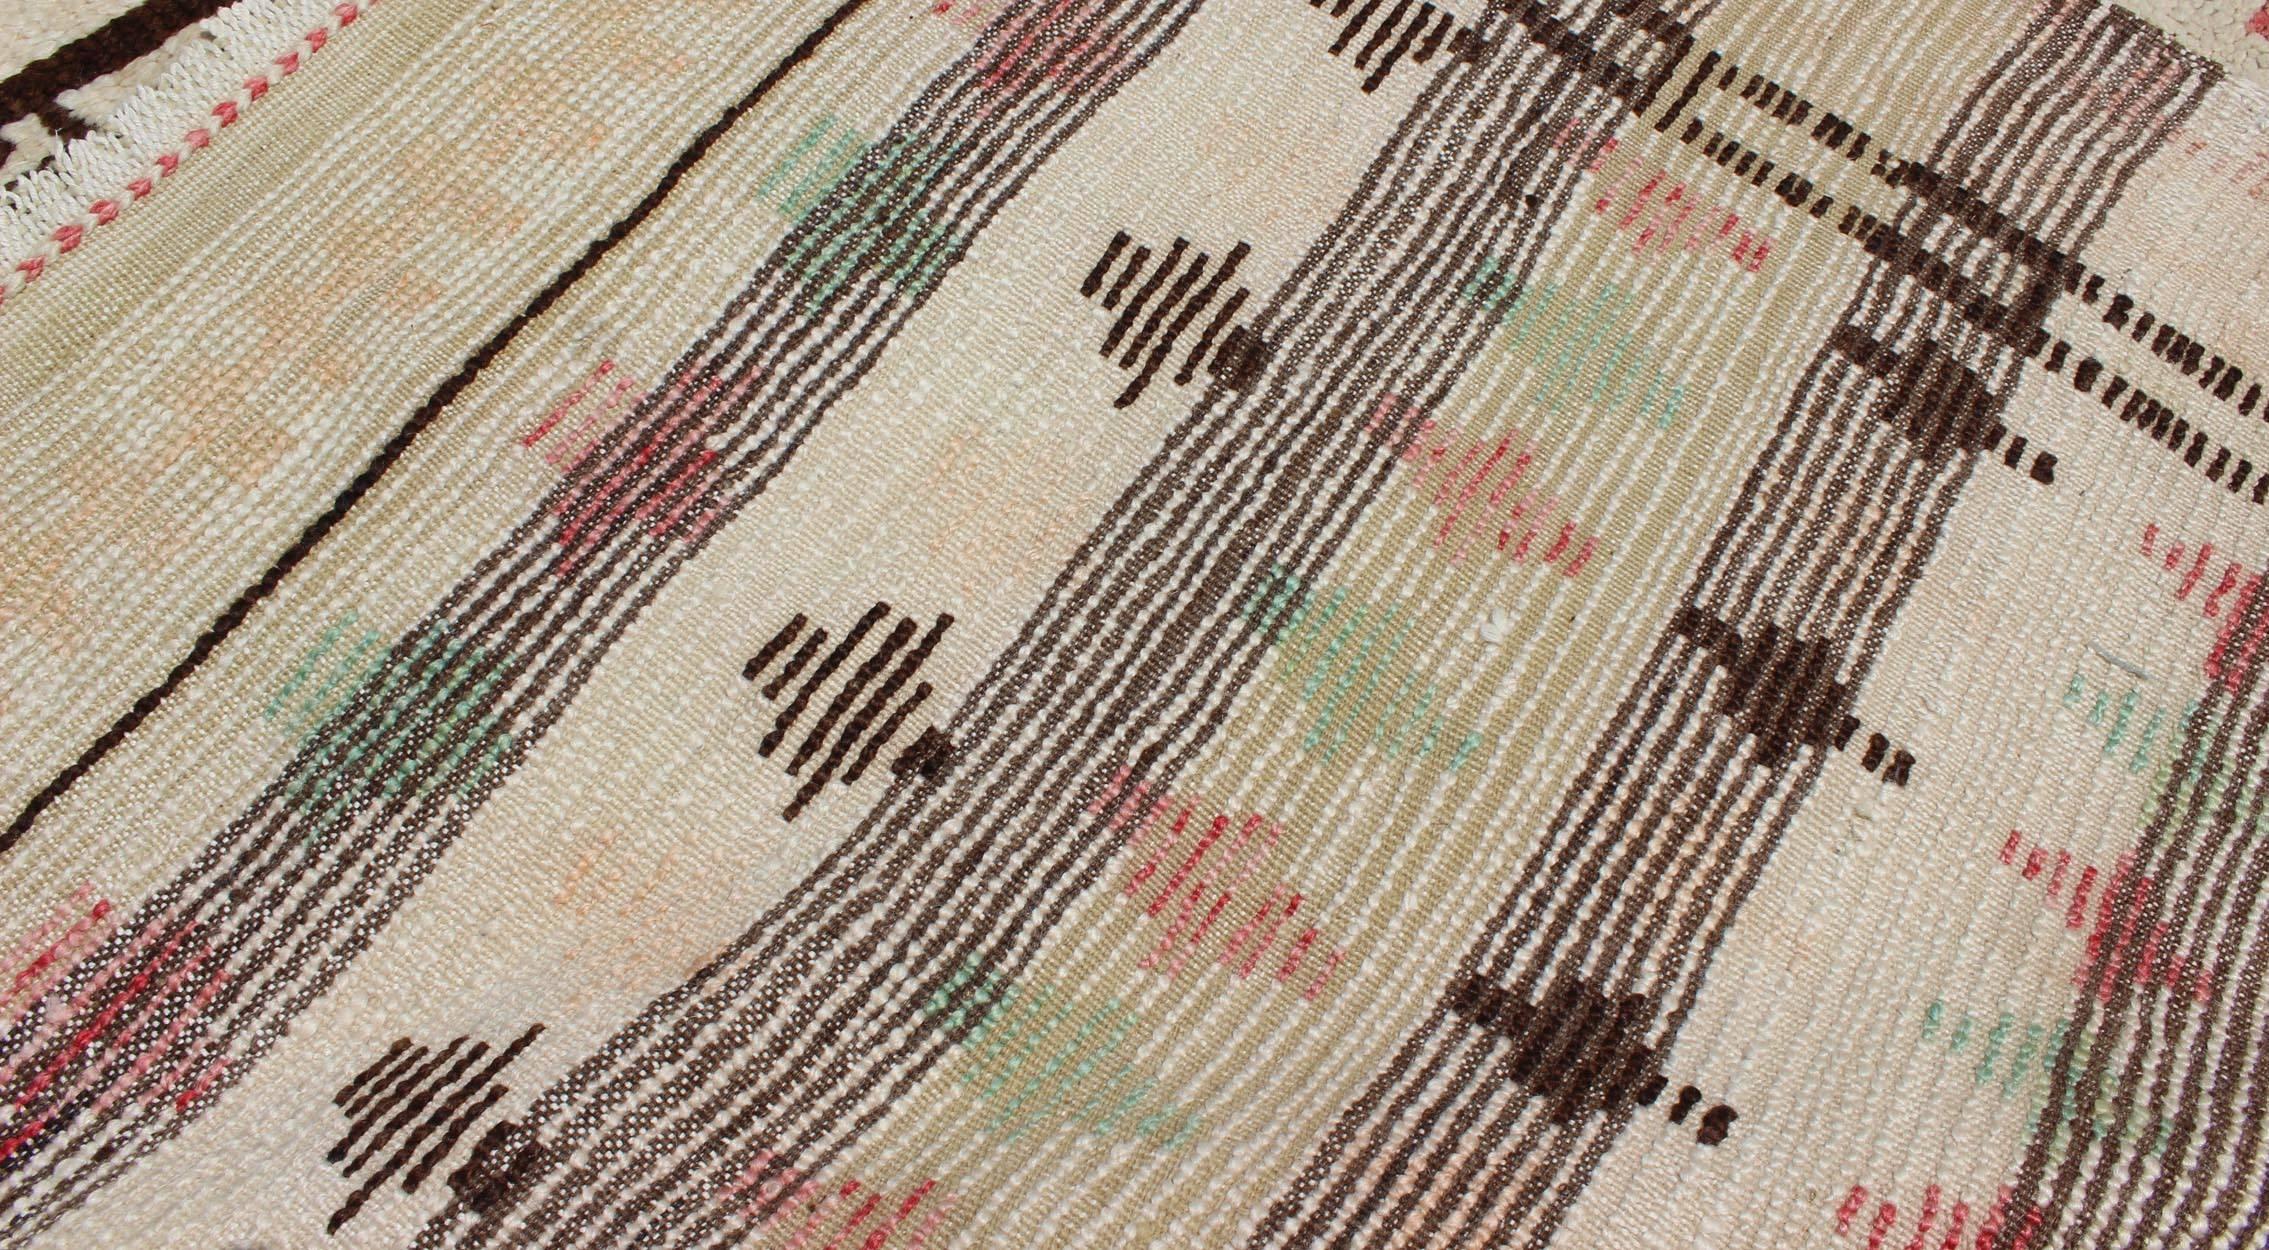 Unique Moroccan Runner in Light Ivory Background & Brown, Rose, Green Accents 4